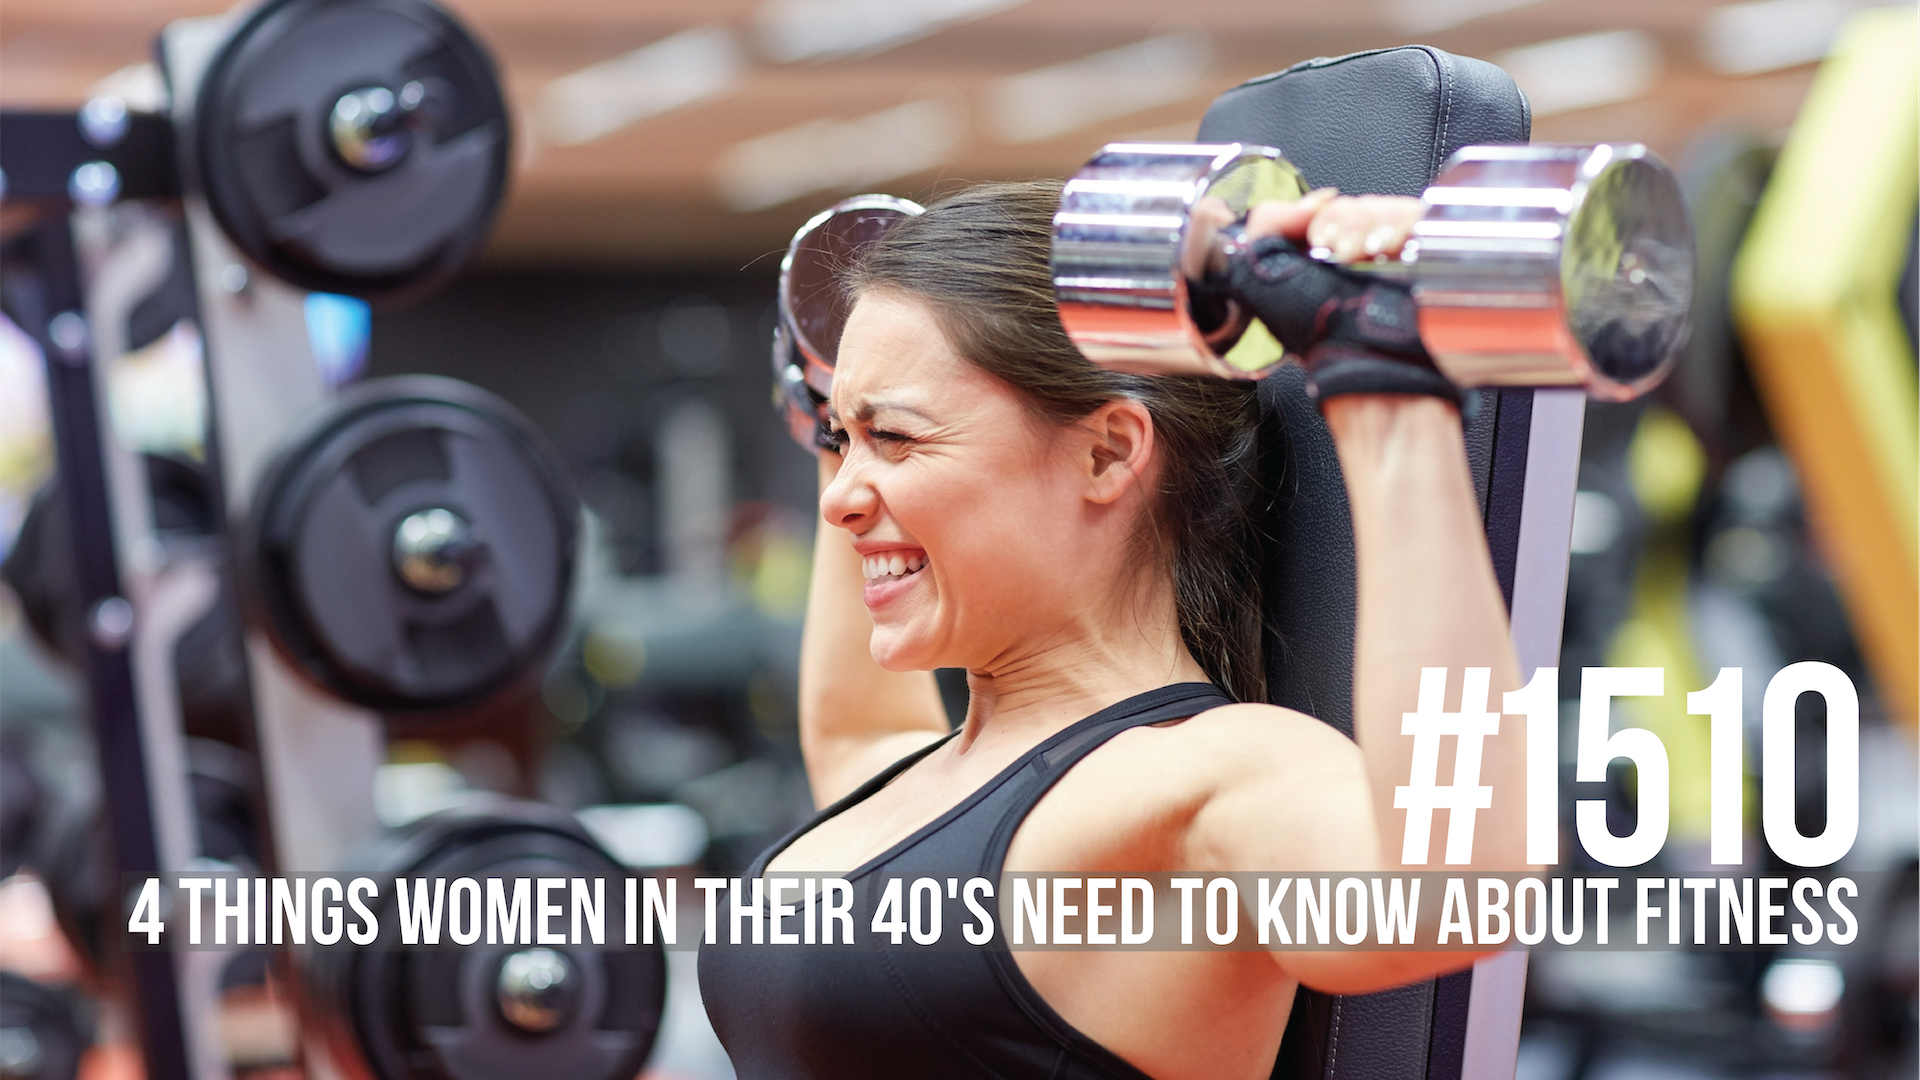 1510: Four Things Women in Their 40’s Need to Know About Fitness